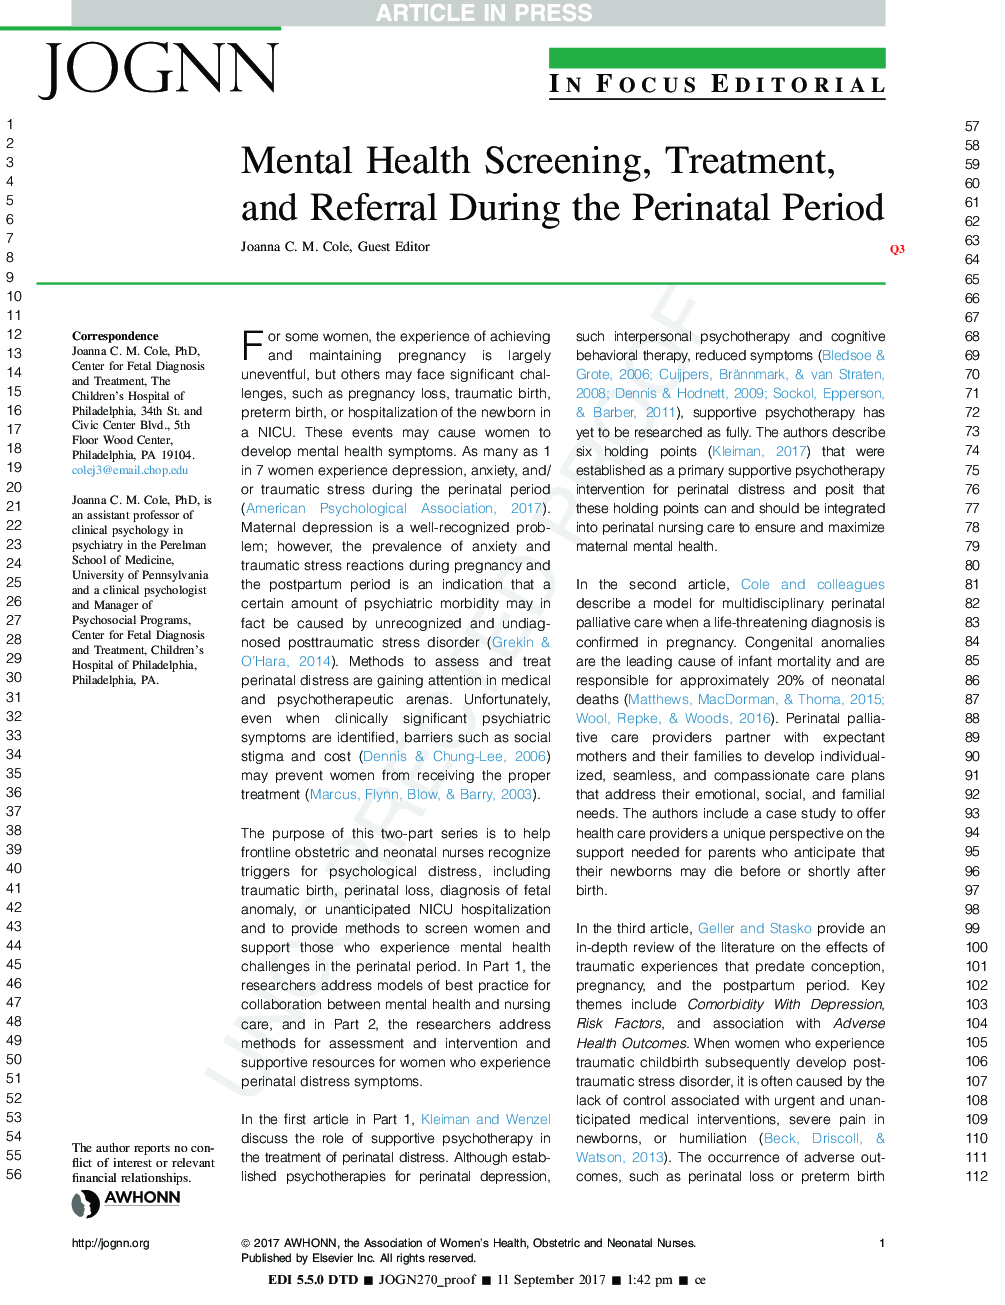 Mental Health Screening, Treatment, and Referral During the Perinatal Period